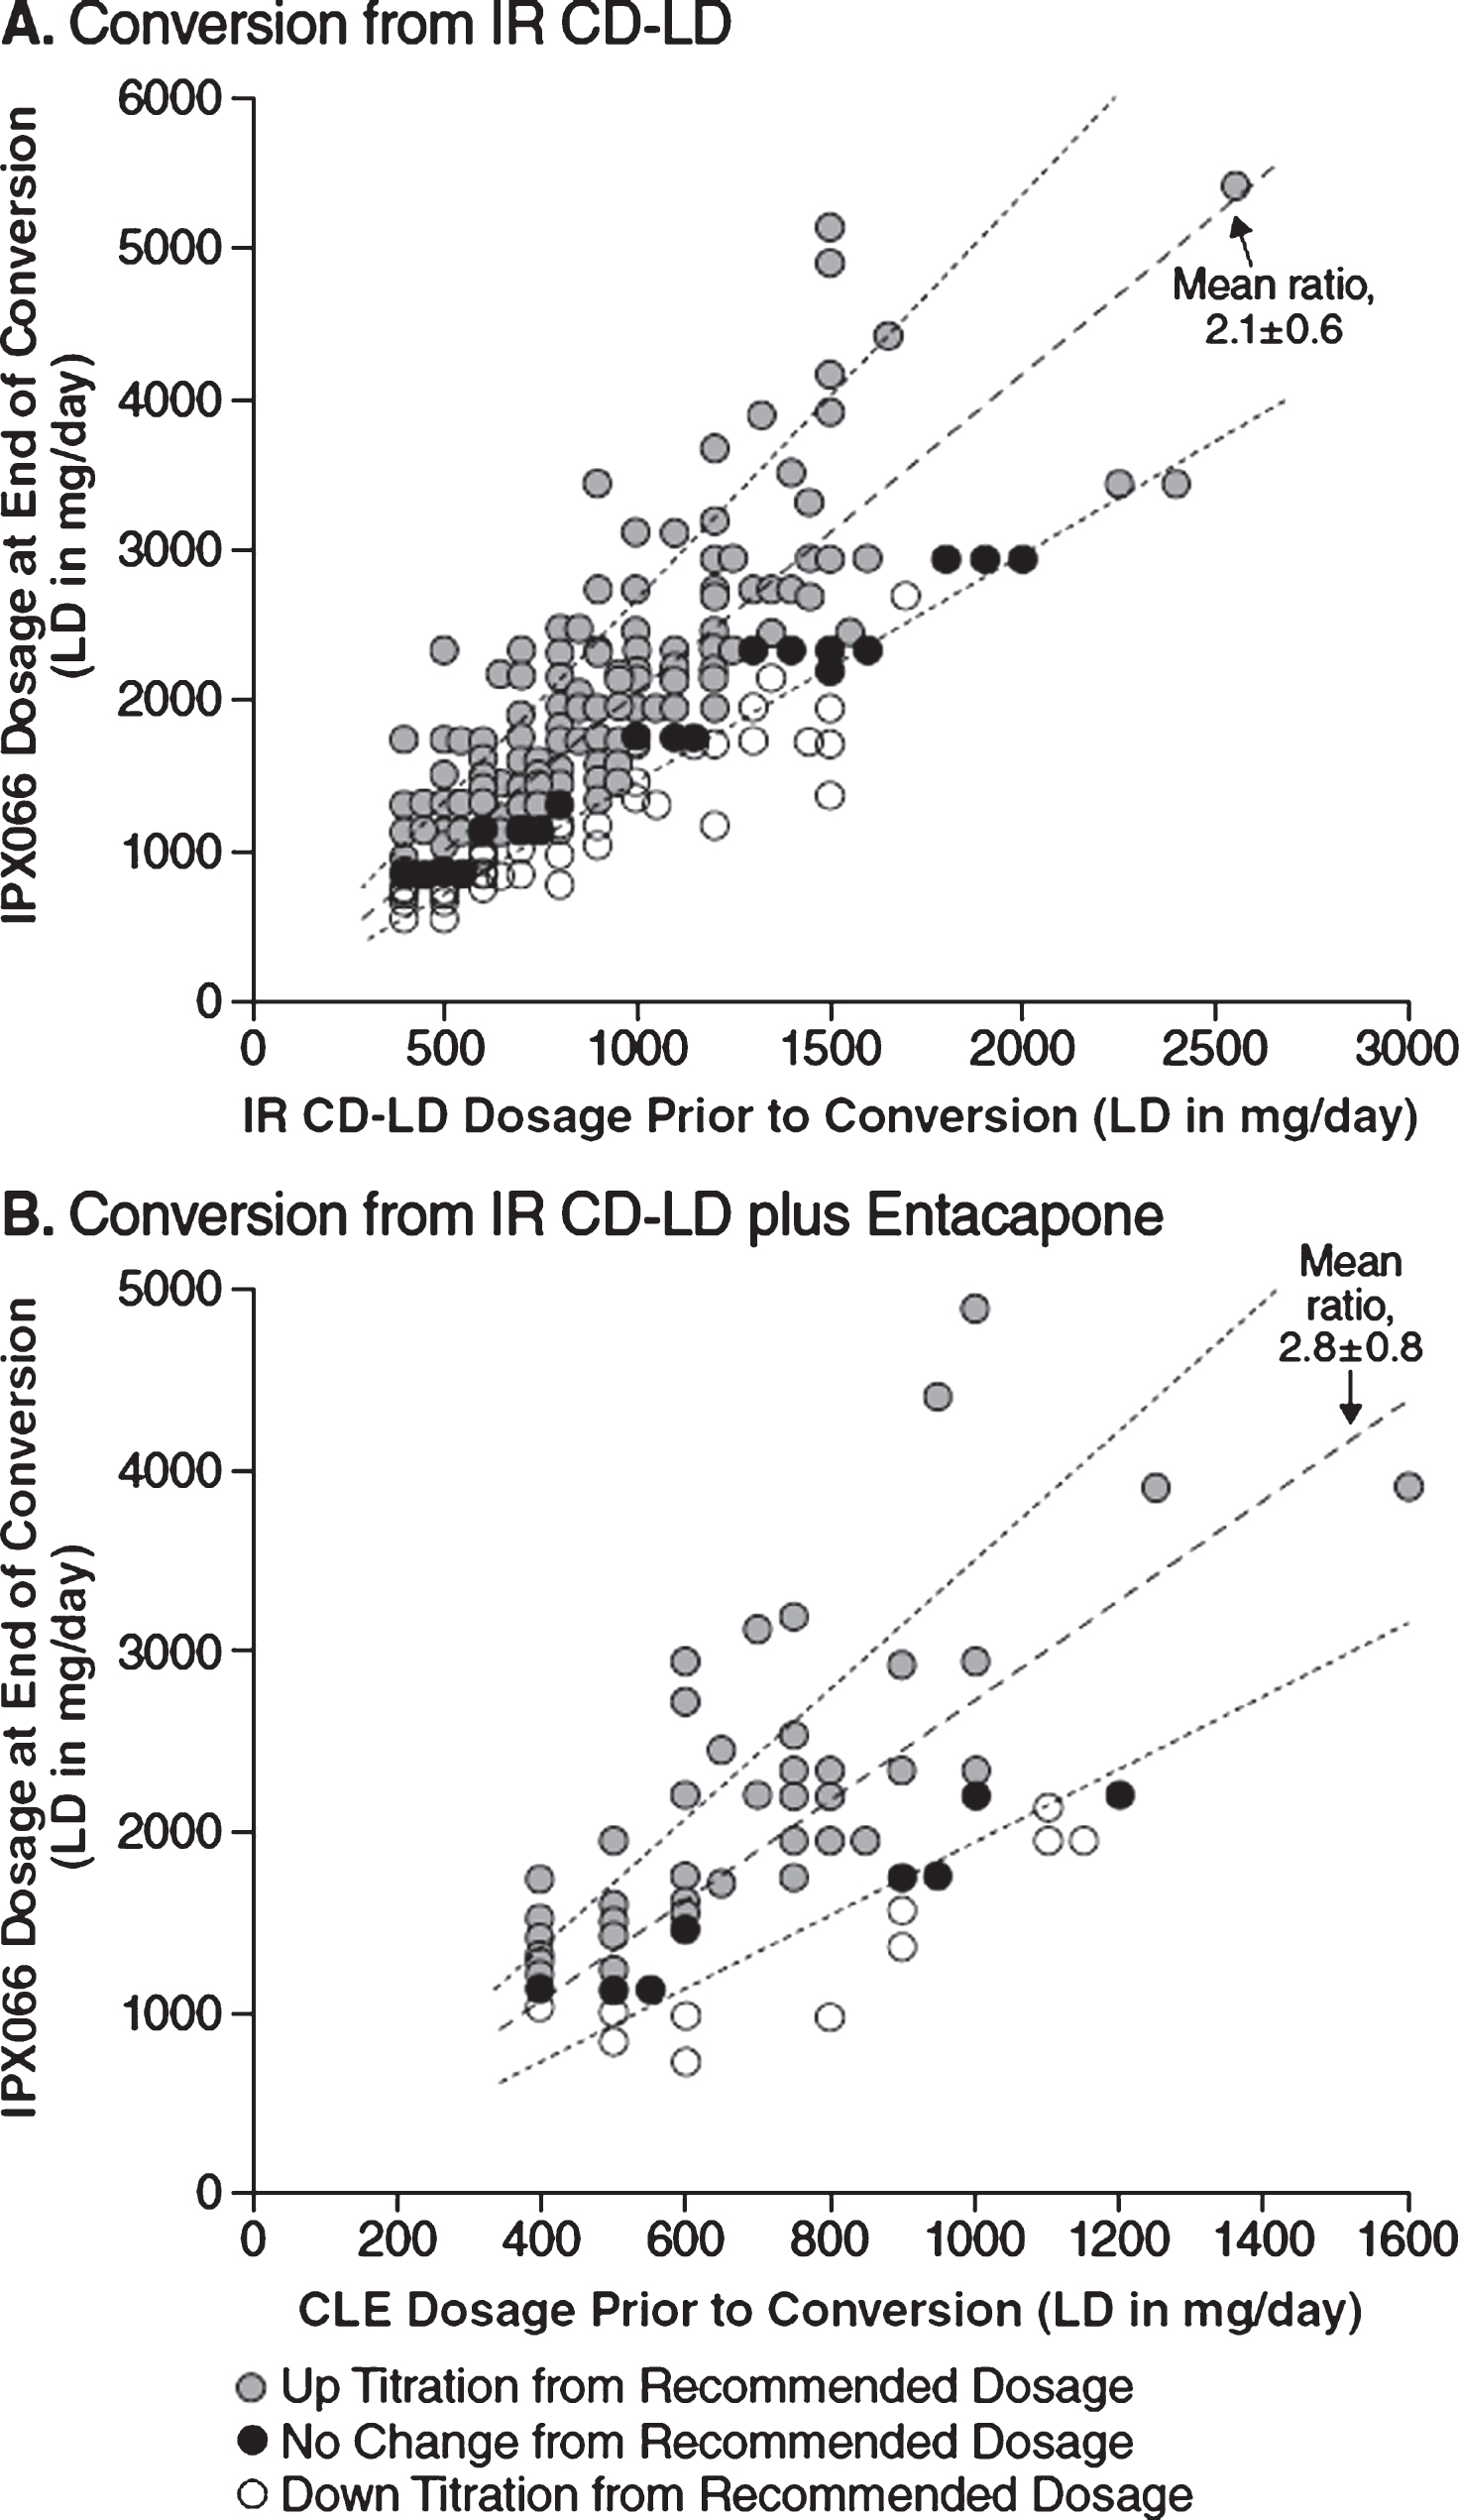 Distribution of LD daily dosage, end of conversion versus pre-conversion among conversion completers, for conversion to IPX066 from IR CD-LD (A) or from CLE (B), with mean conversion ratios (dashed lines) and their standard deviations (dotted lines). CD, carbidopa; CLE, immediate-release carbidopa-levodopa plus entacapone; IR, immediate-release; LD, levodopa.